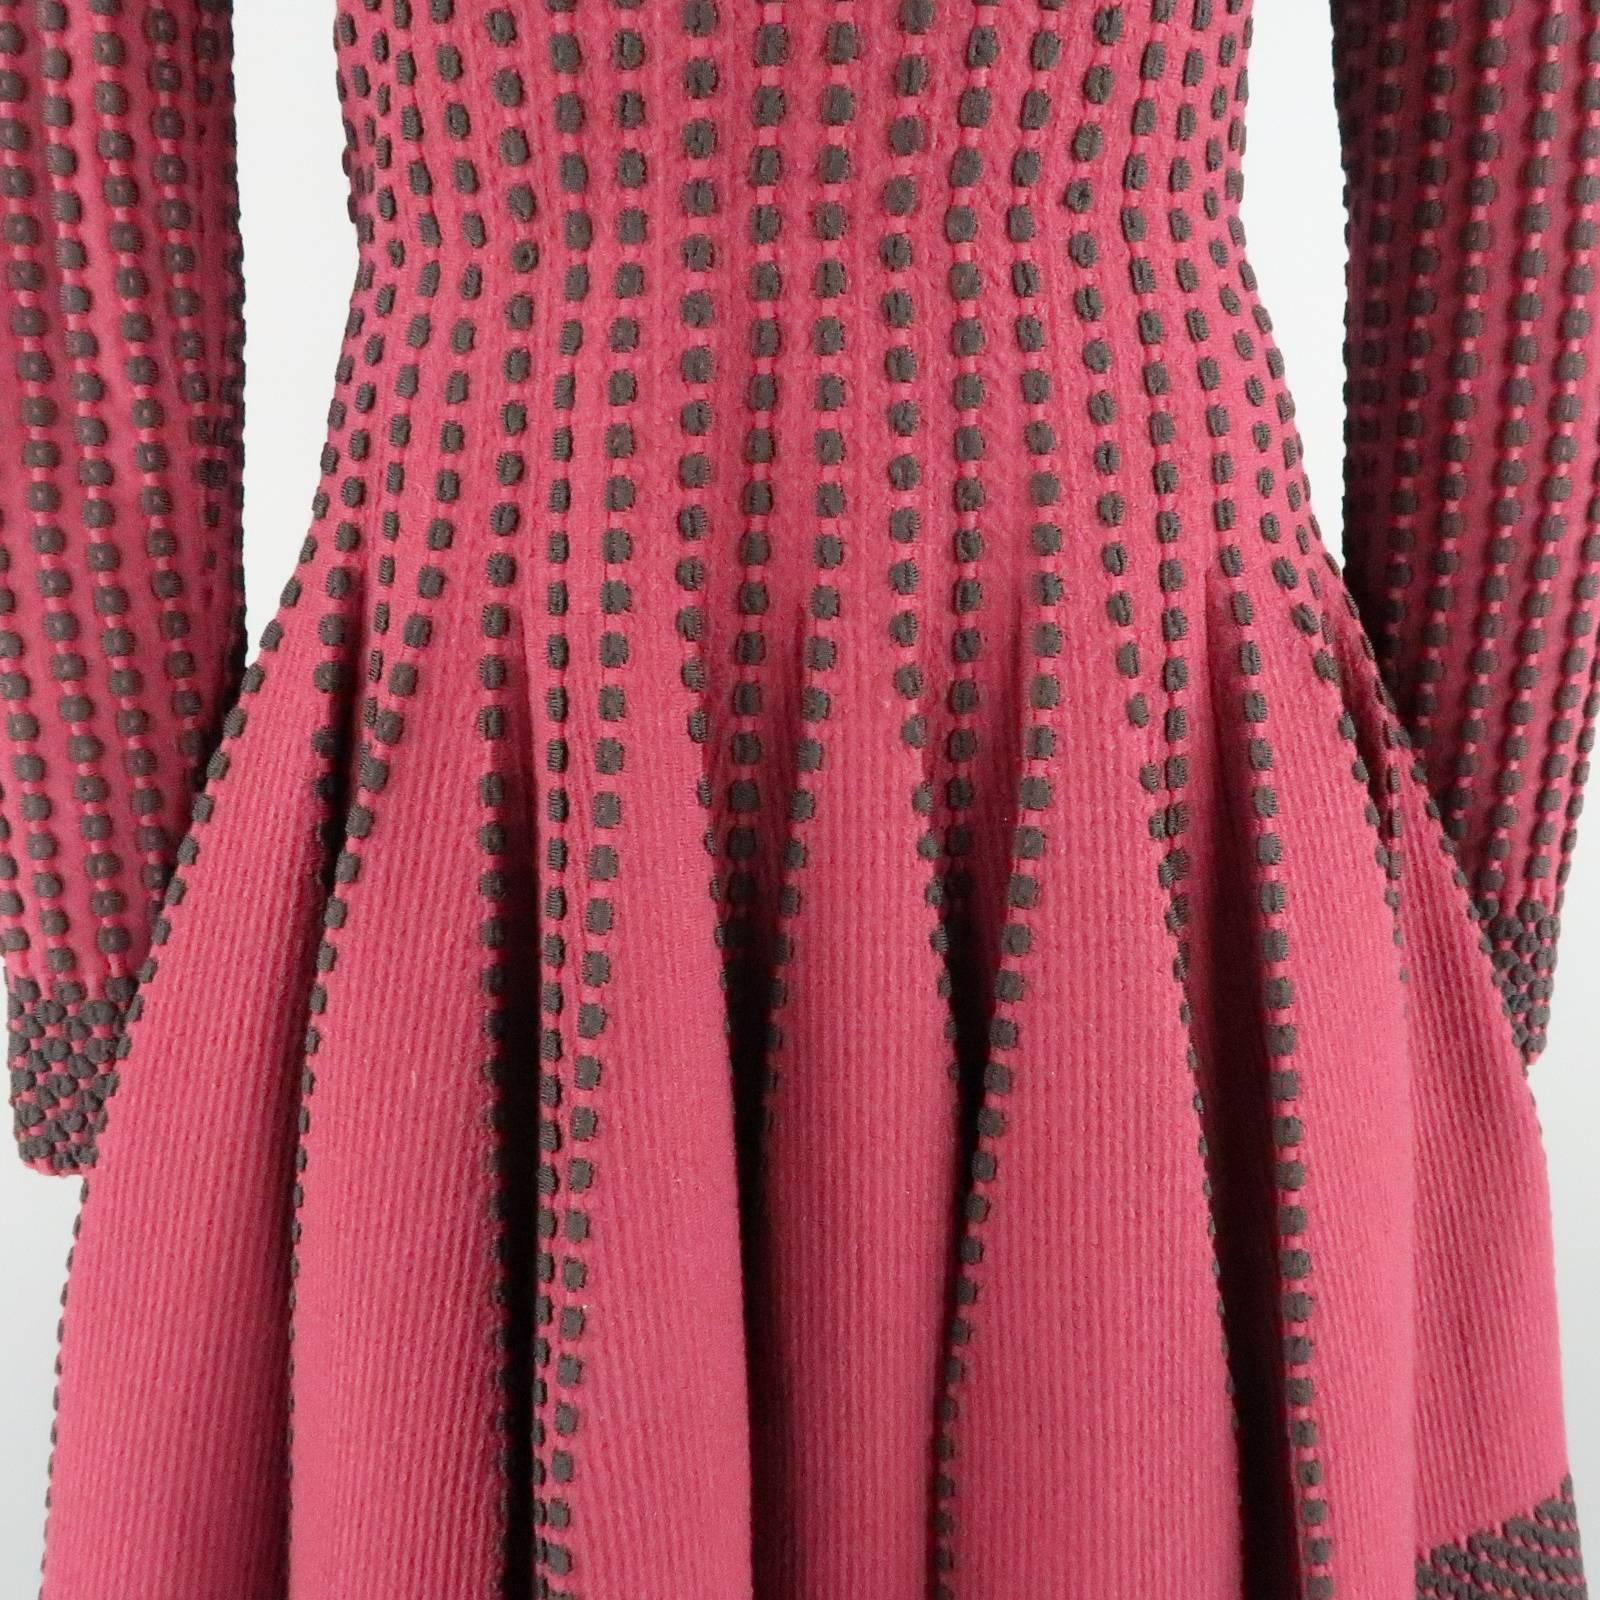 Women's Alaia Burgundy and Black Stretch Wool Fruit Flair Long Sleeve Dress, Size 10